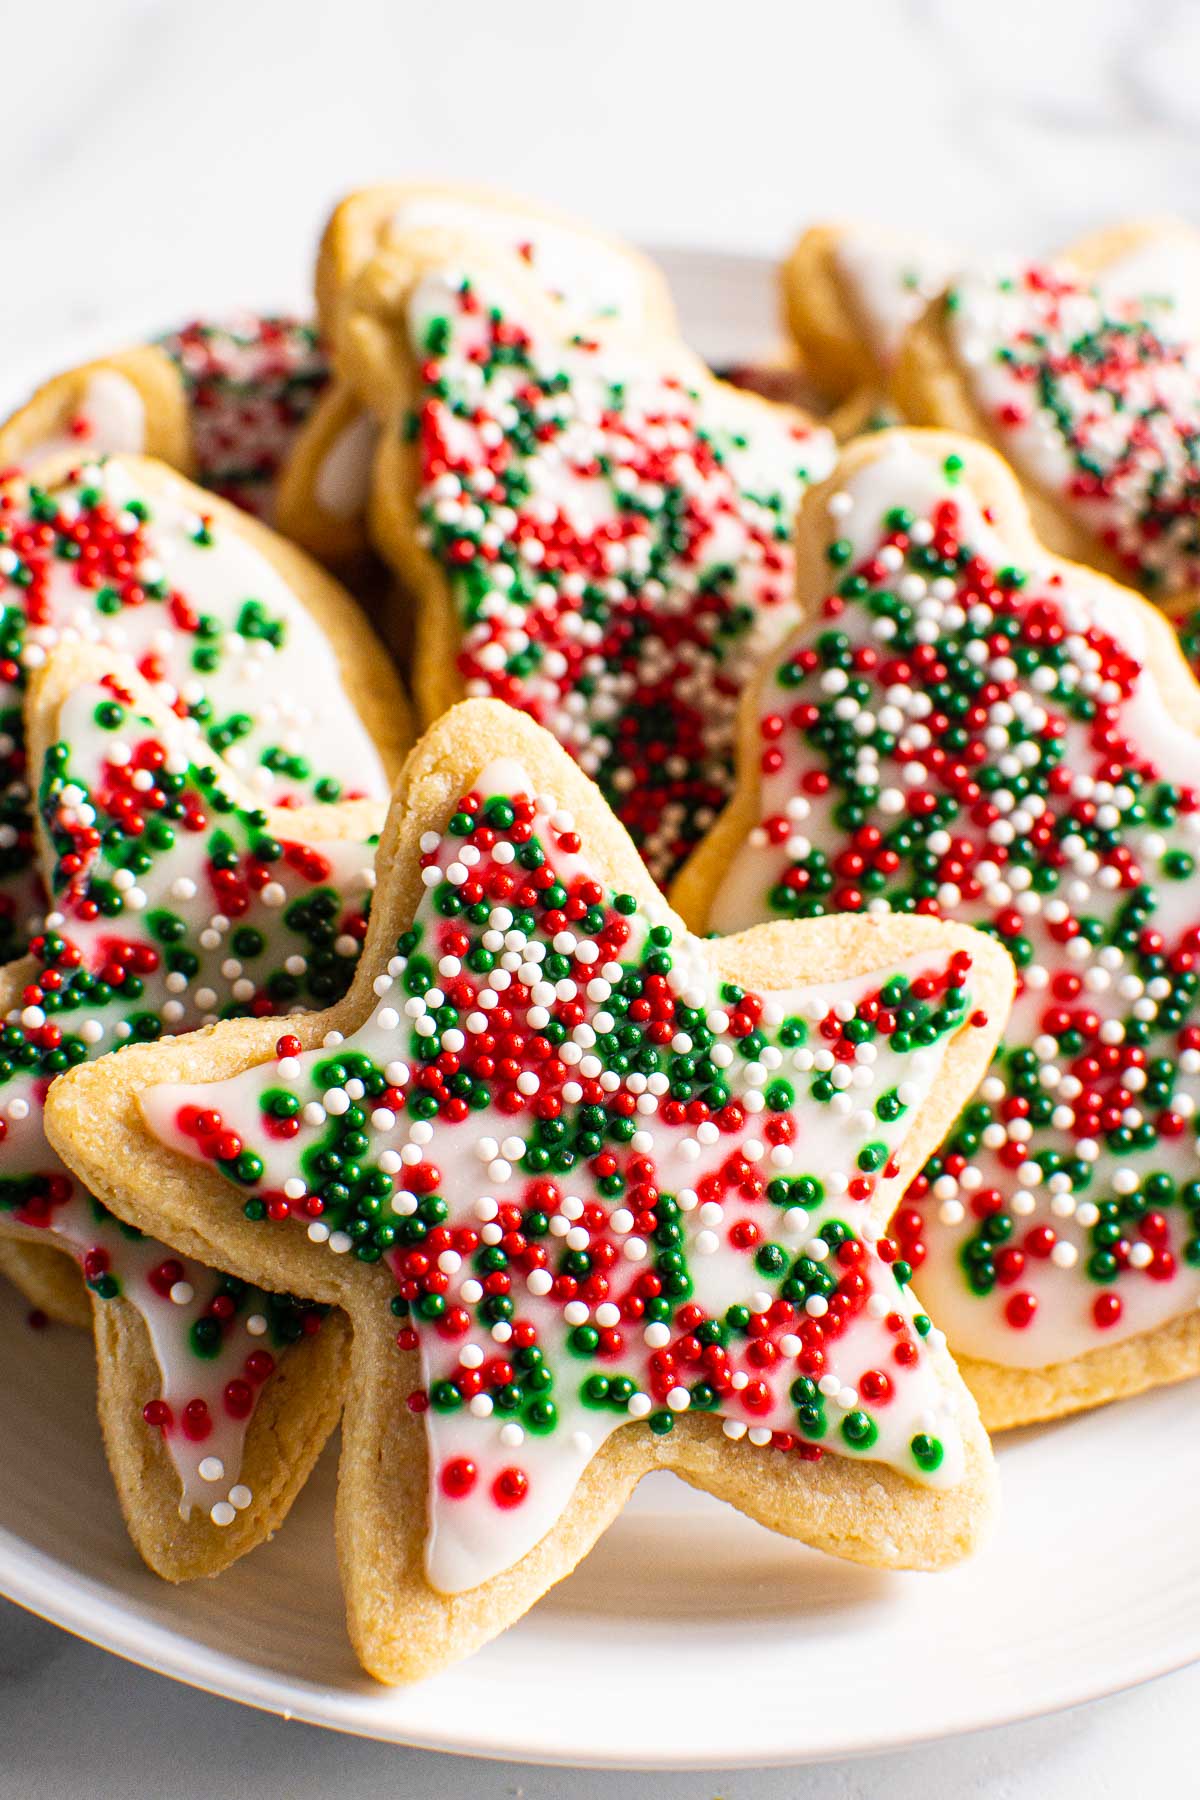 Decorated healthy christmas sugar cookies on a plate for serving.